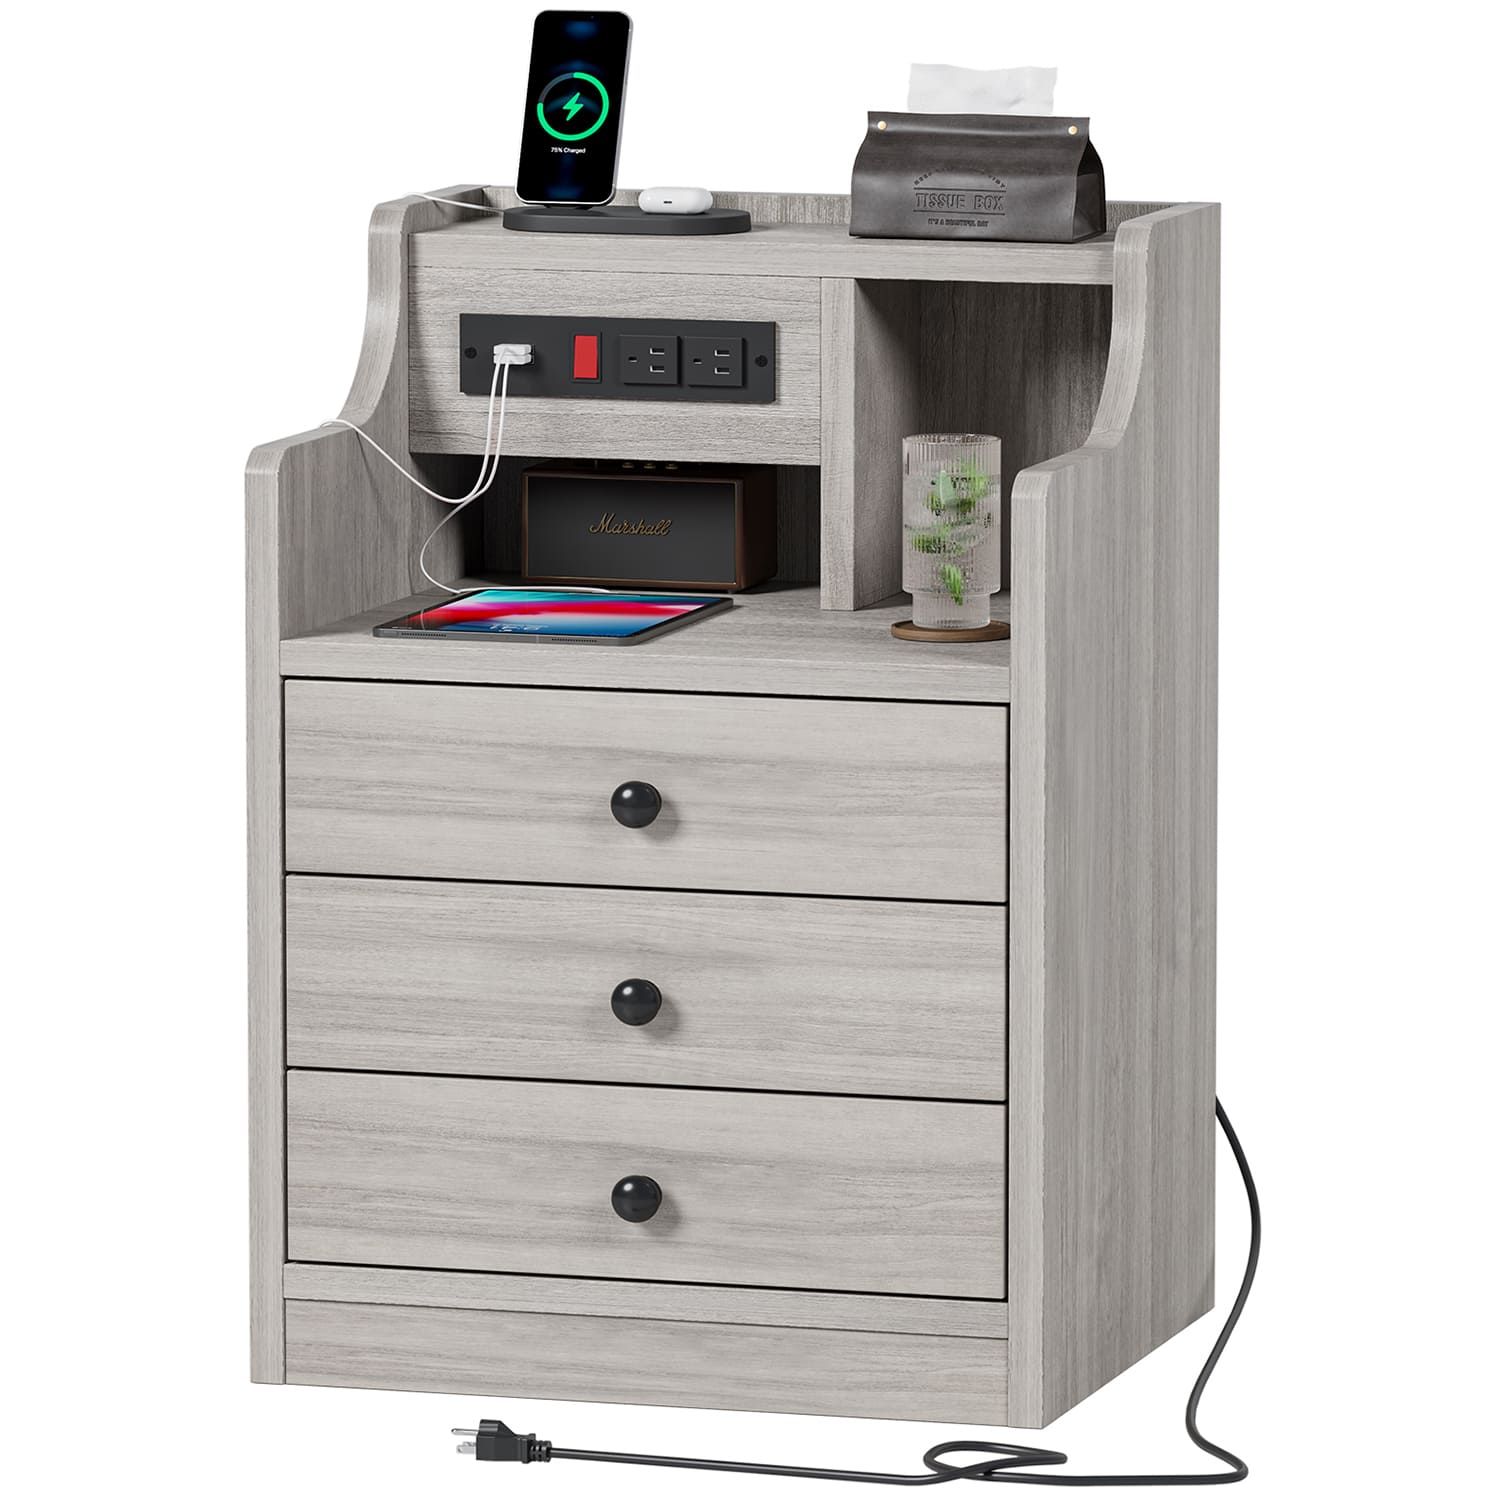 Sikaic Nightstand with Outlets Storage Grey